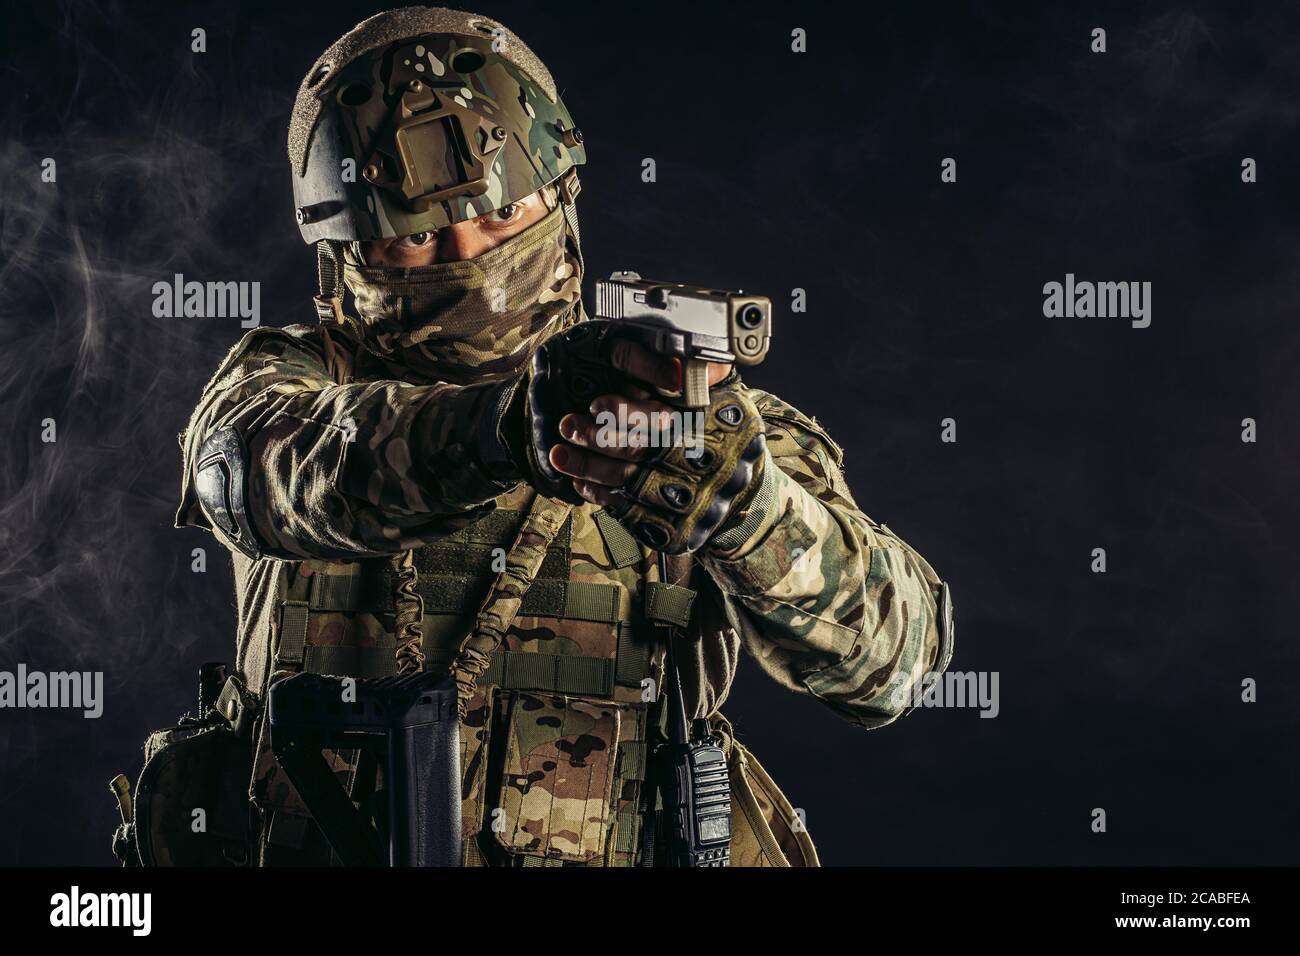 young military, soldier man holding gun wearing military wear, green camouflage and helmet on head, combatant Stock Photo